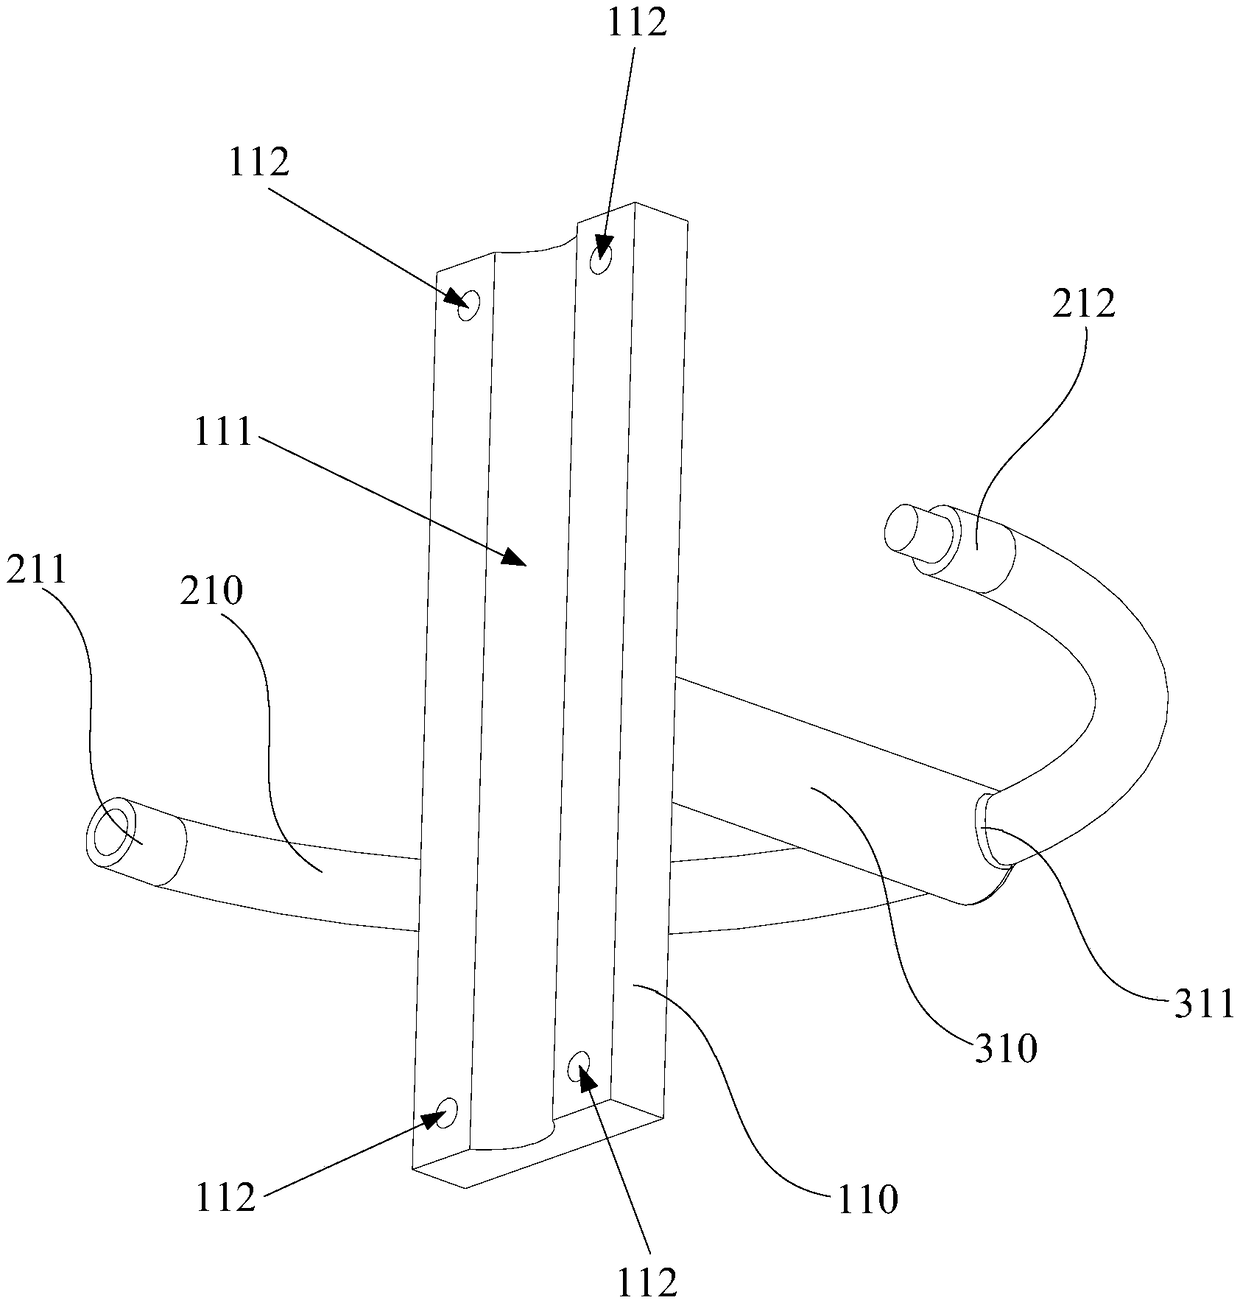 Grounding transfer wire clamp and wire grounding structure